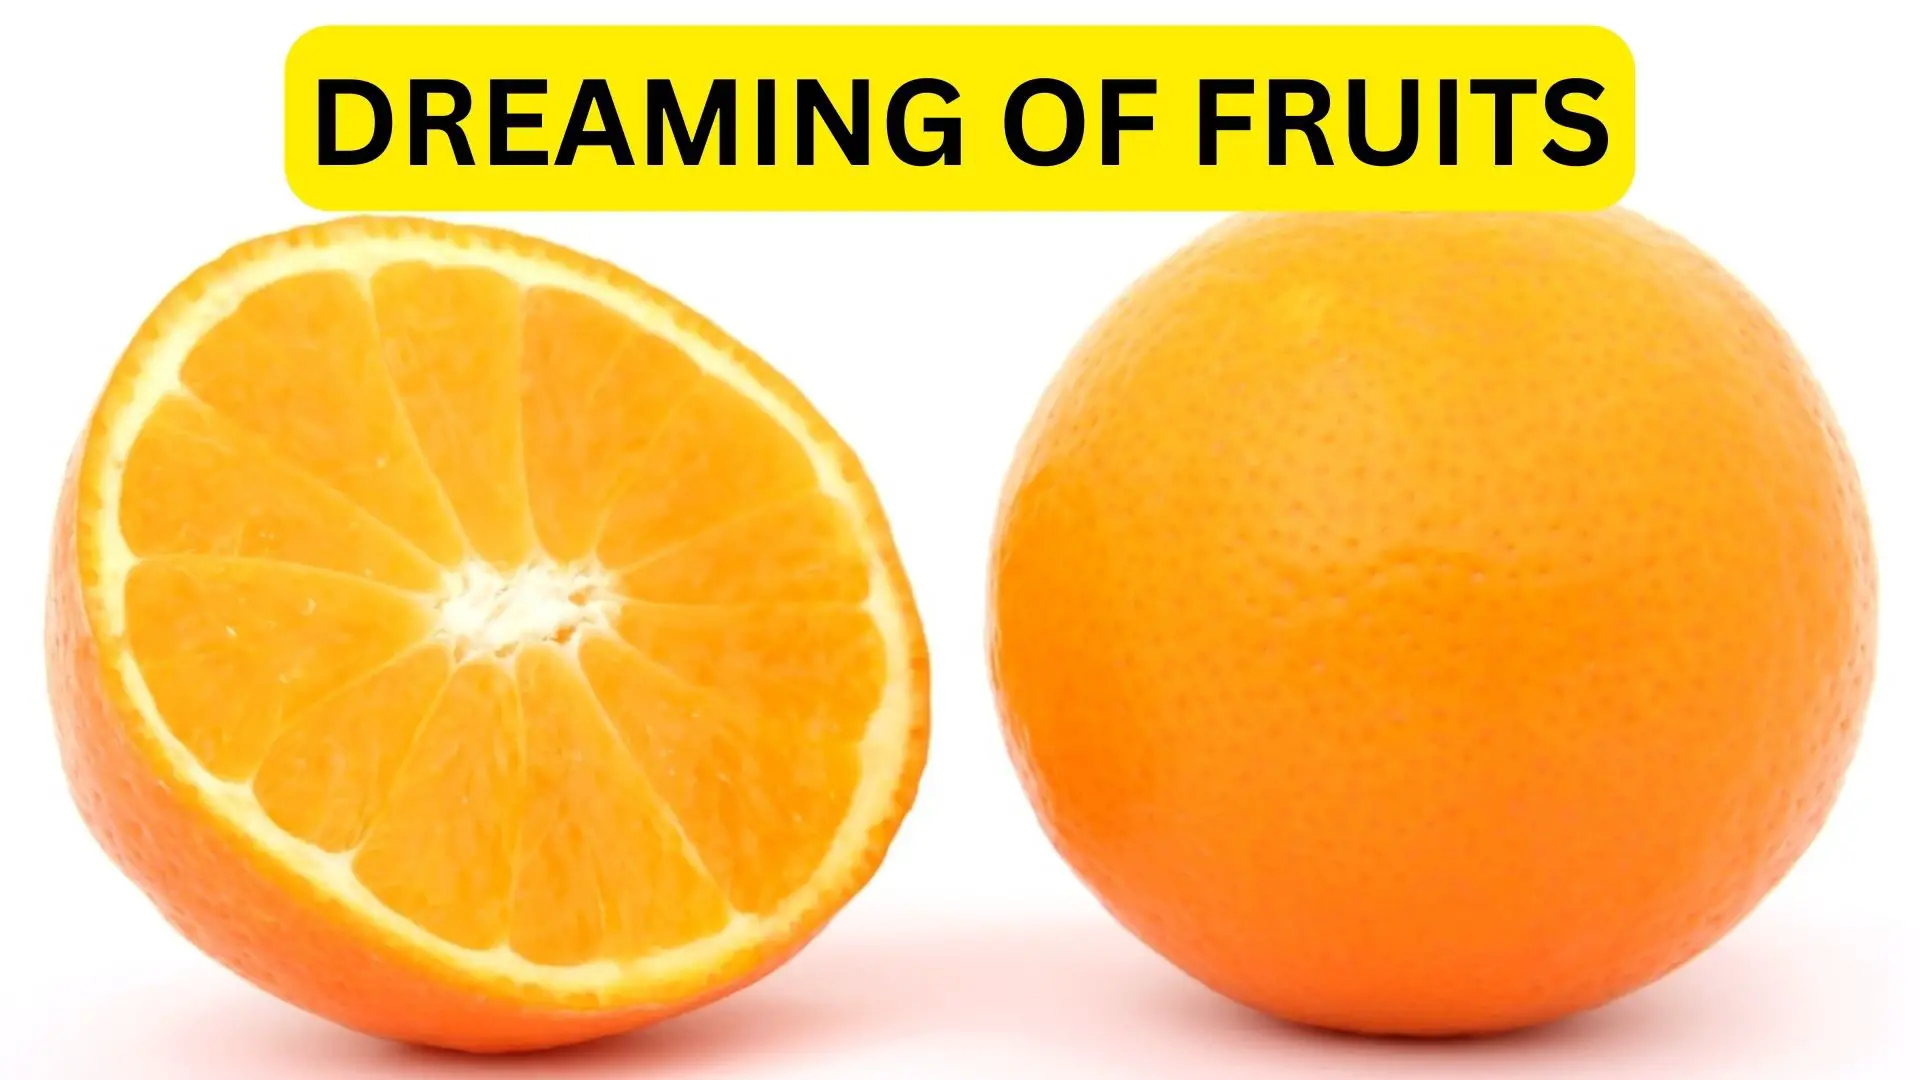 2. Dreaming Of Picking Fruits